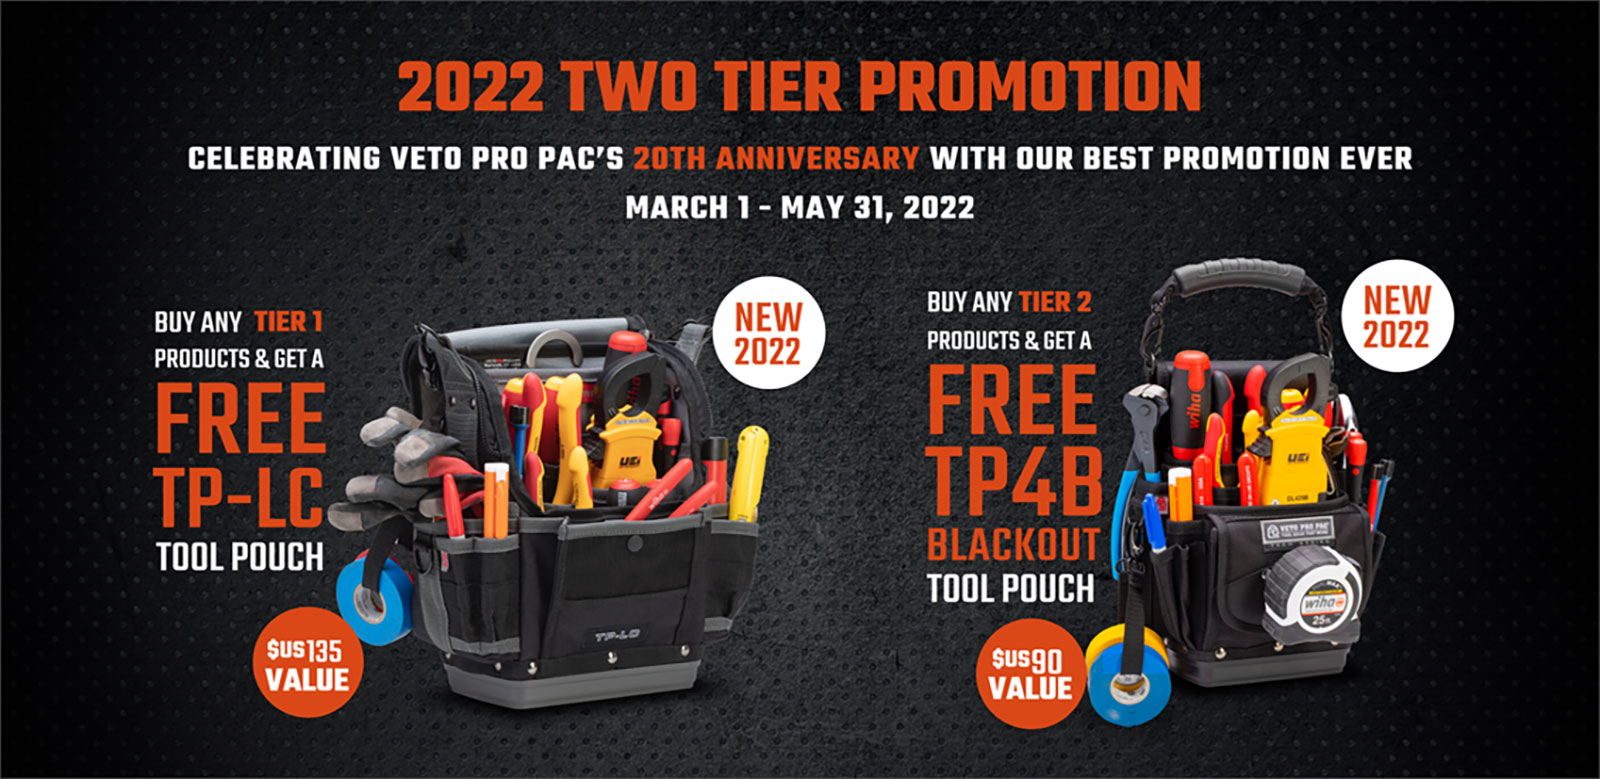 2022 Two Tier Promotion